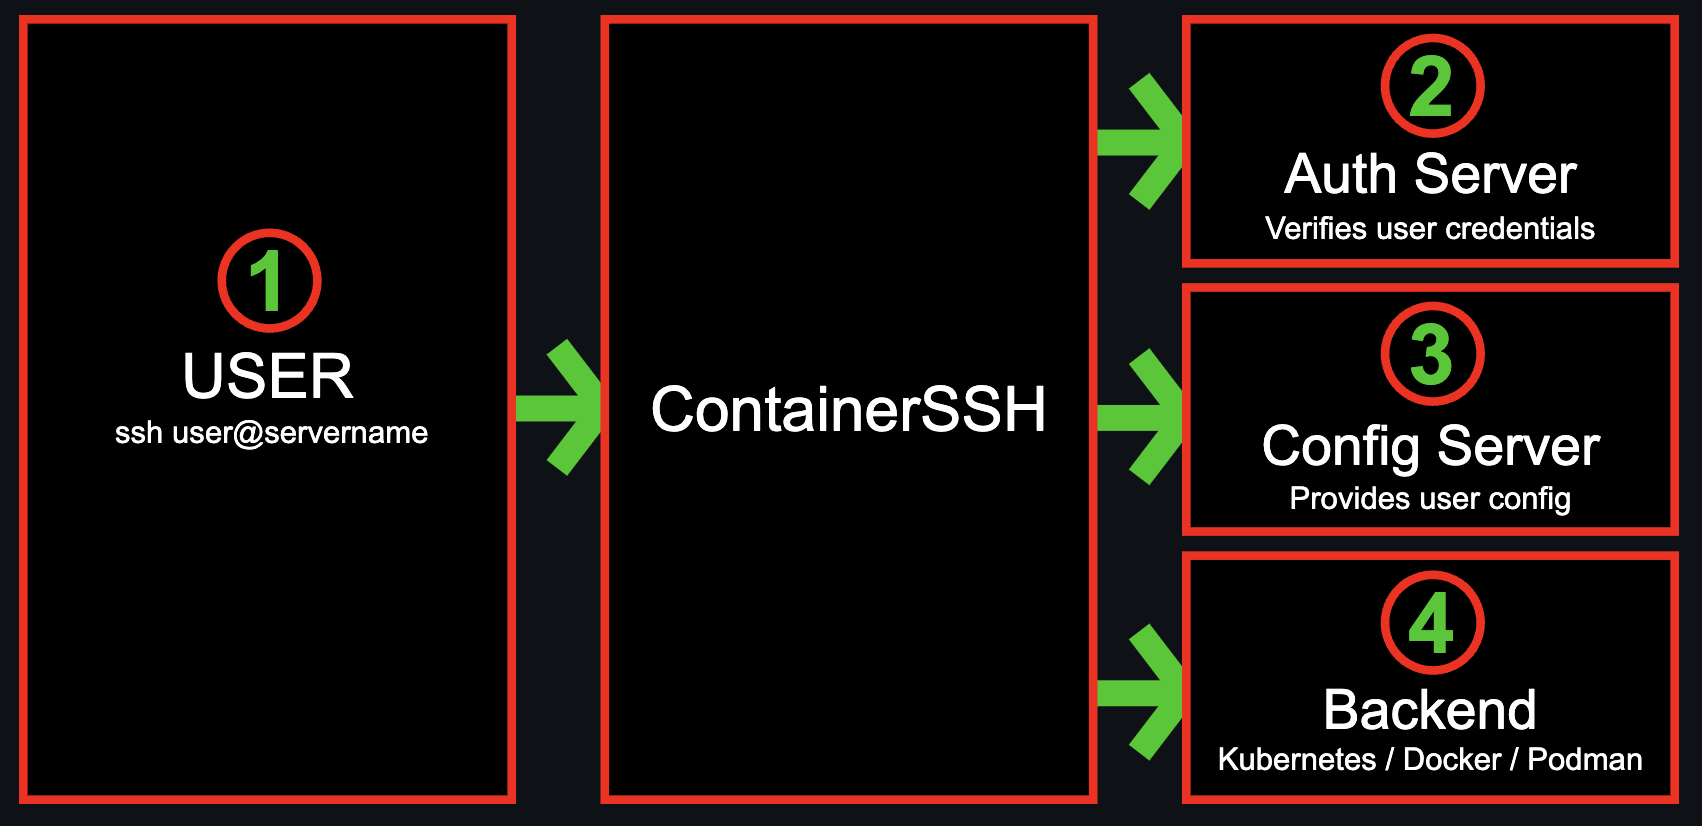 ContainerSSH